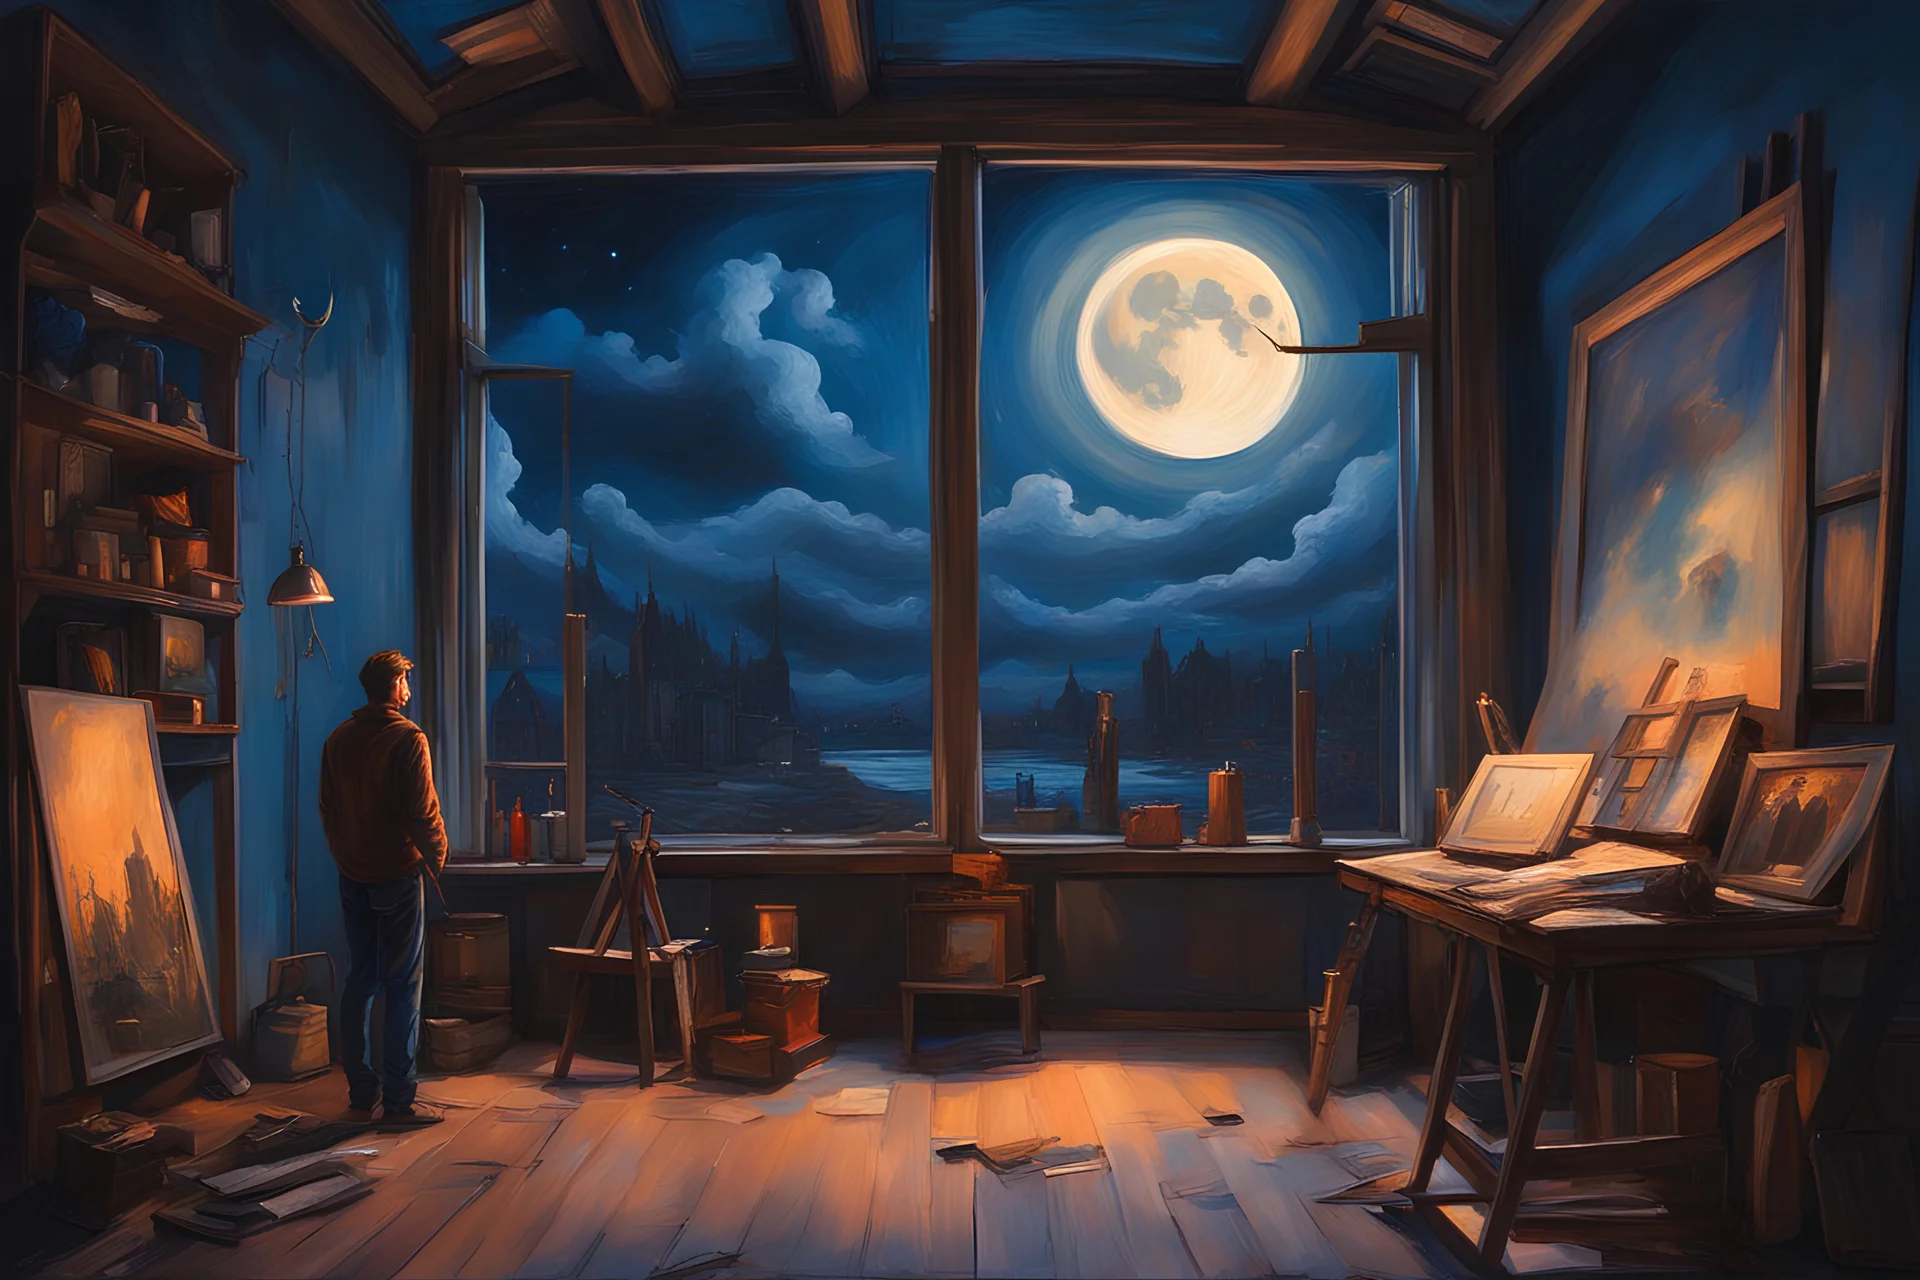 night scene, big spacious high ceiling attic that is old painting studio. one man artist standing in front of the window and painting the moon on a canvas. huge window showing the tawny moon outside. dark cool blue light of the night. dark brown wood of the interior.